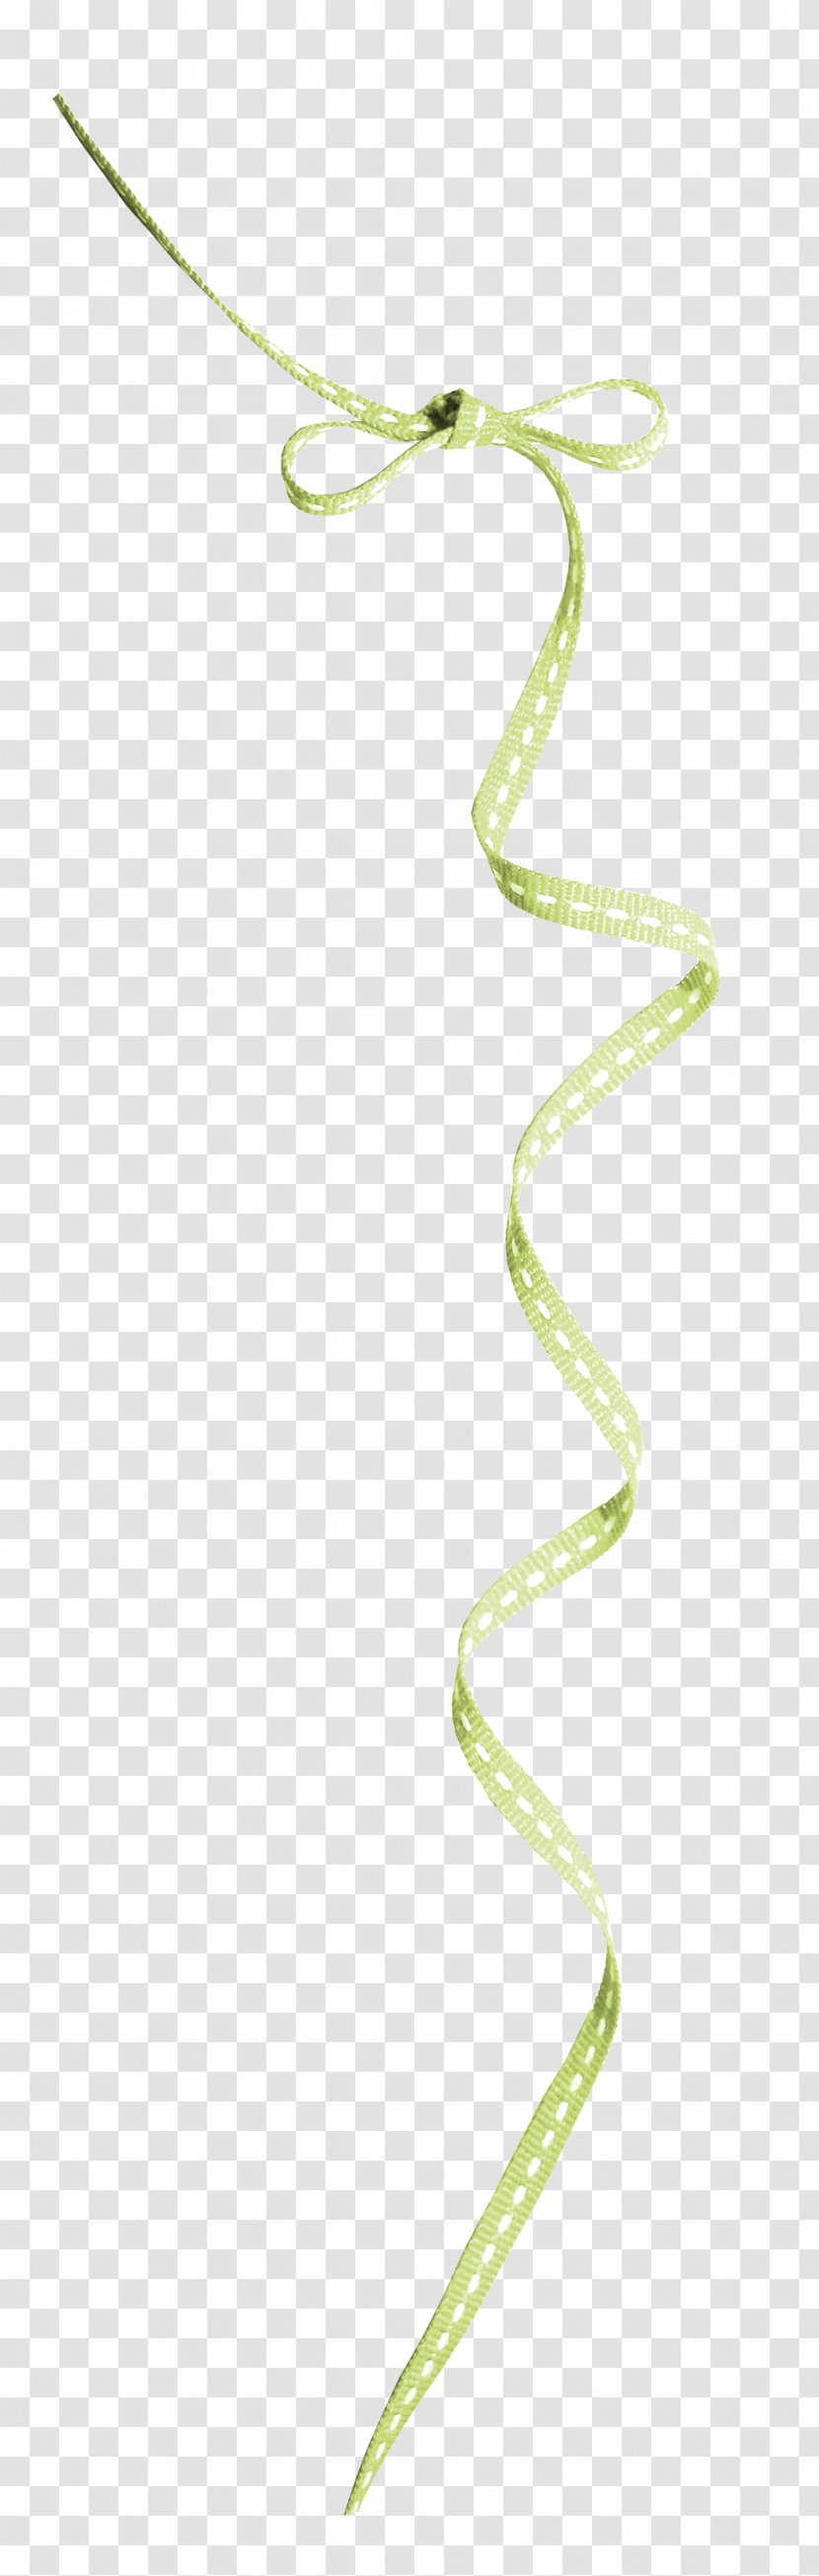 Rope Editing - Stereoscopy Transparent PNG